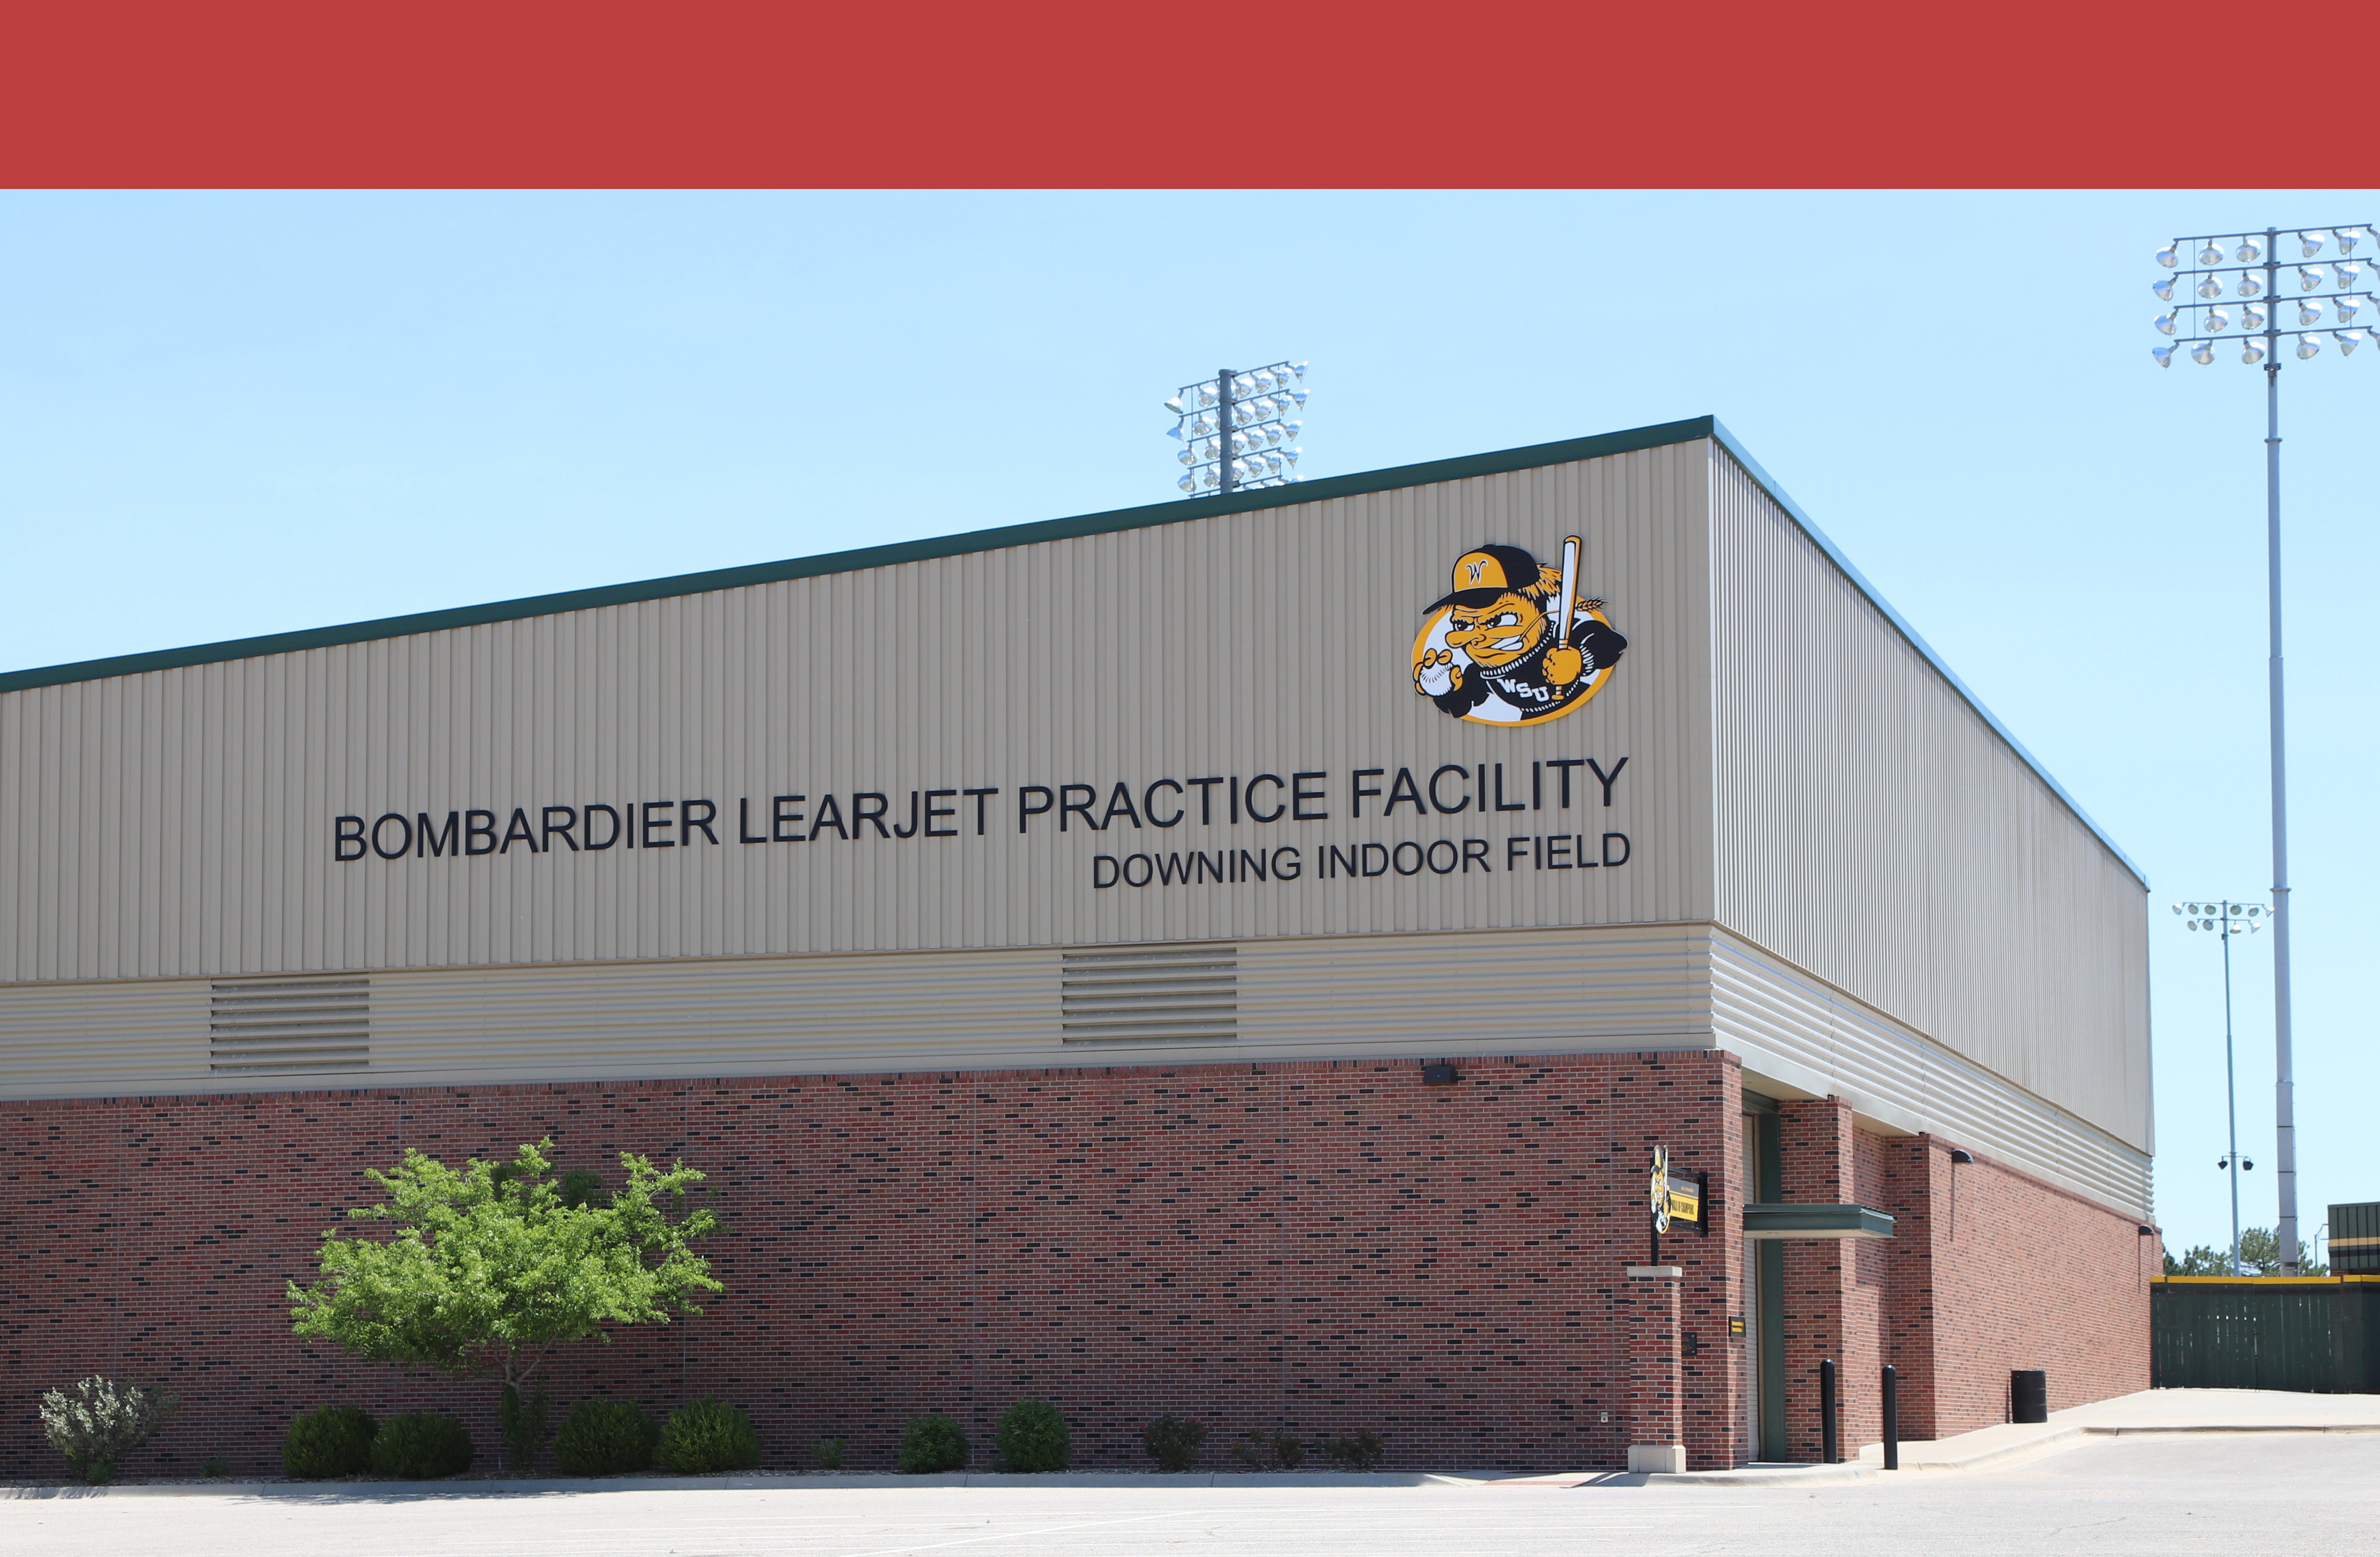 image of the side of the bombardier learjet practice facility. shows the baseball wu shock on the side.